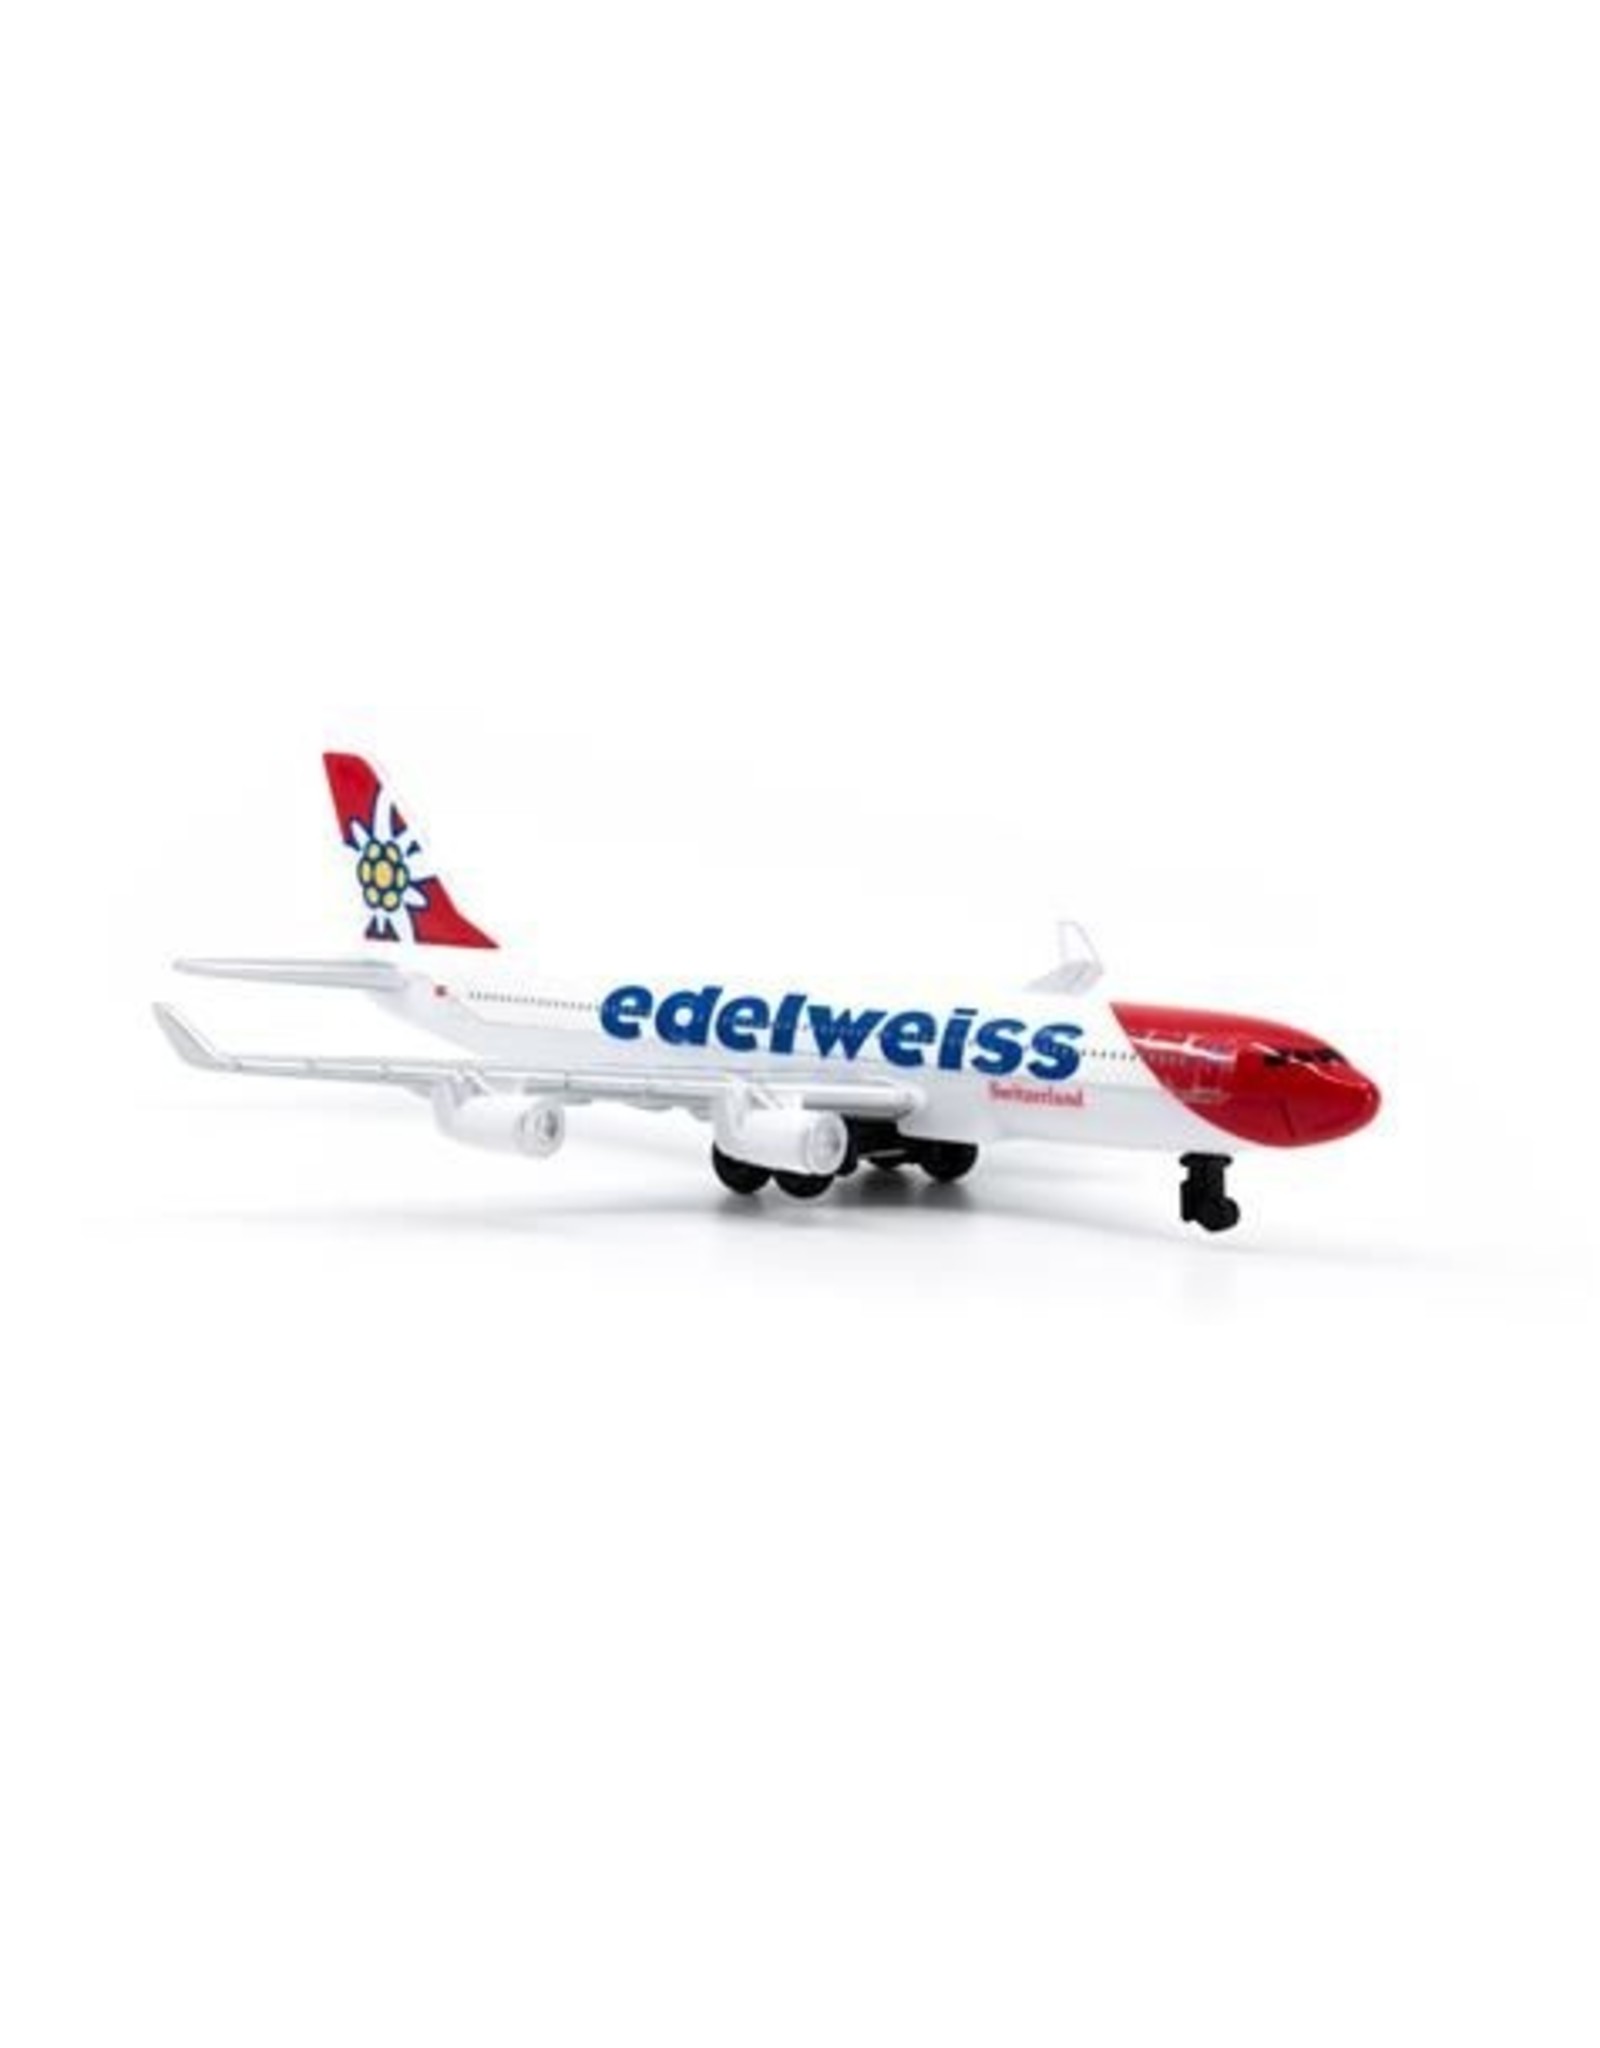 Accessories Ace Toy Aiport Play Set Edelweis